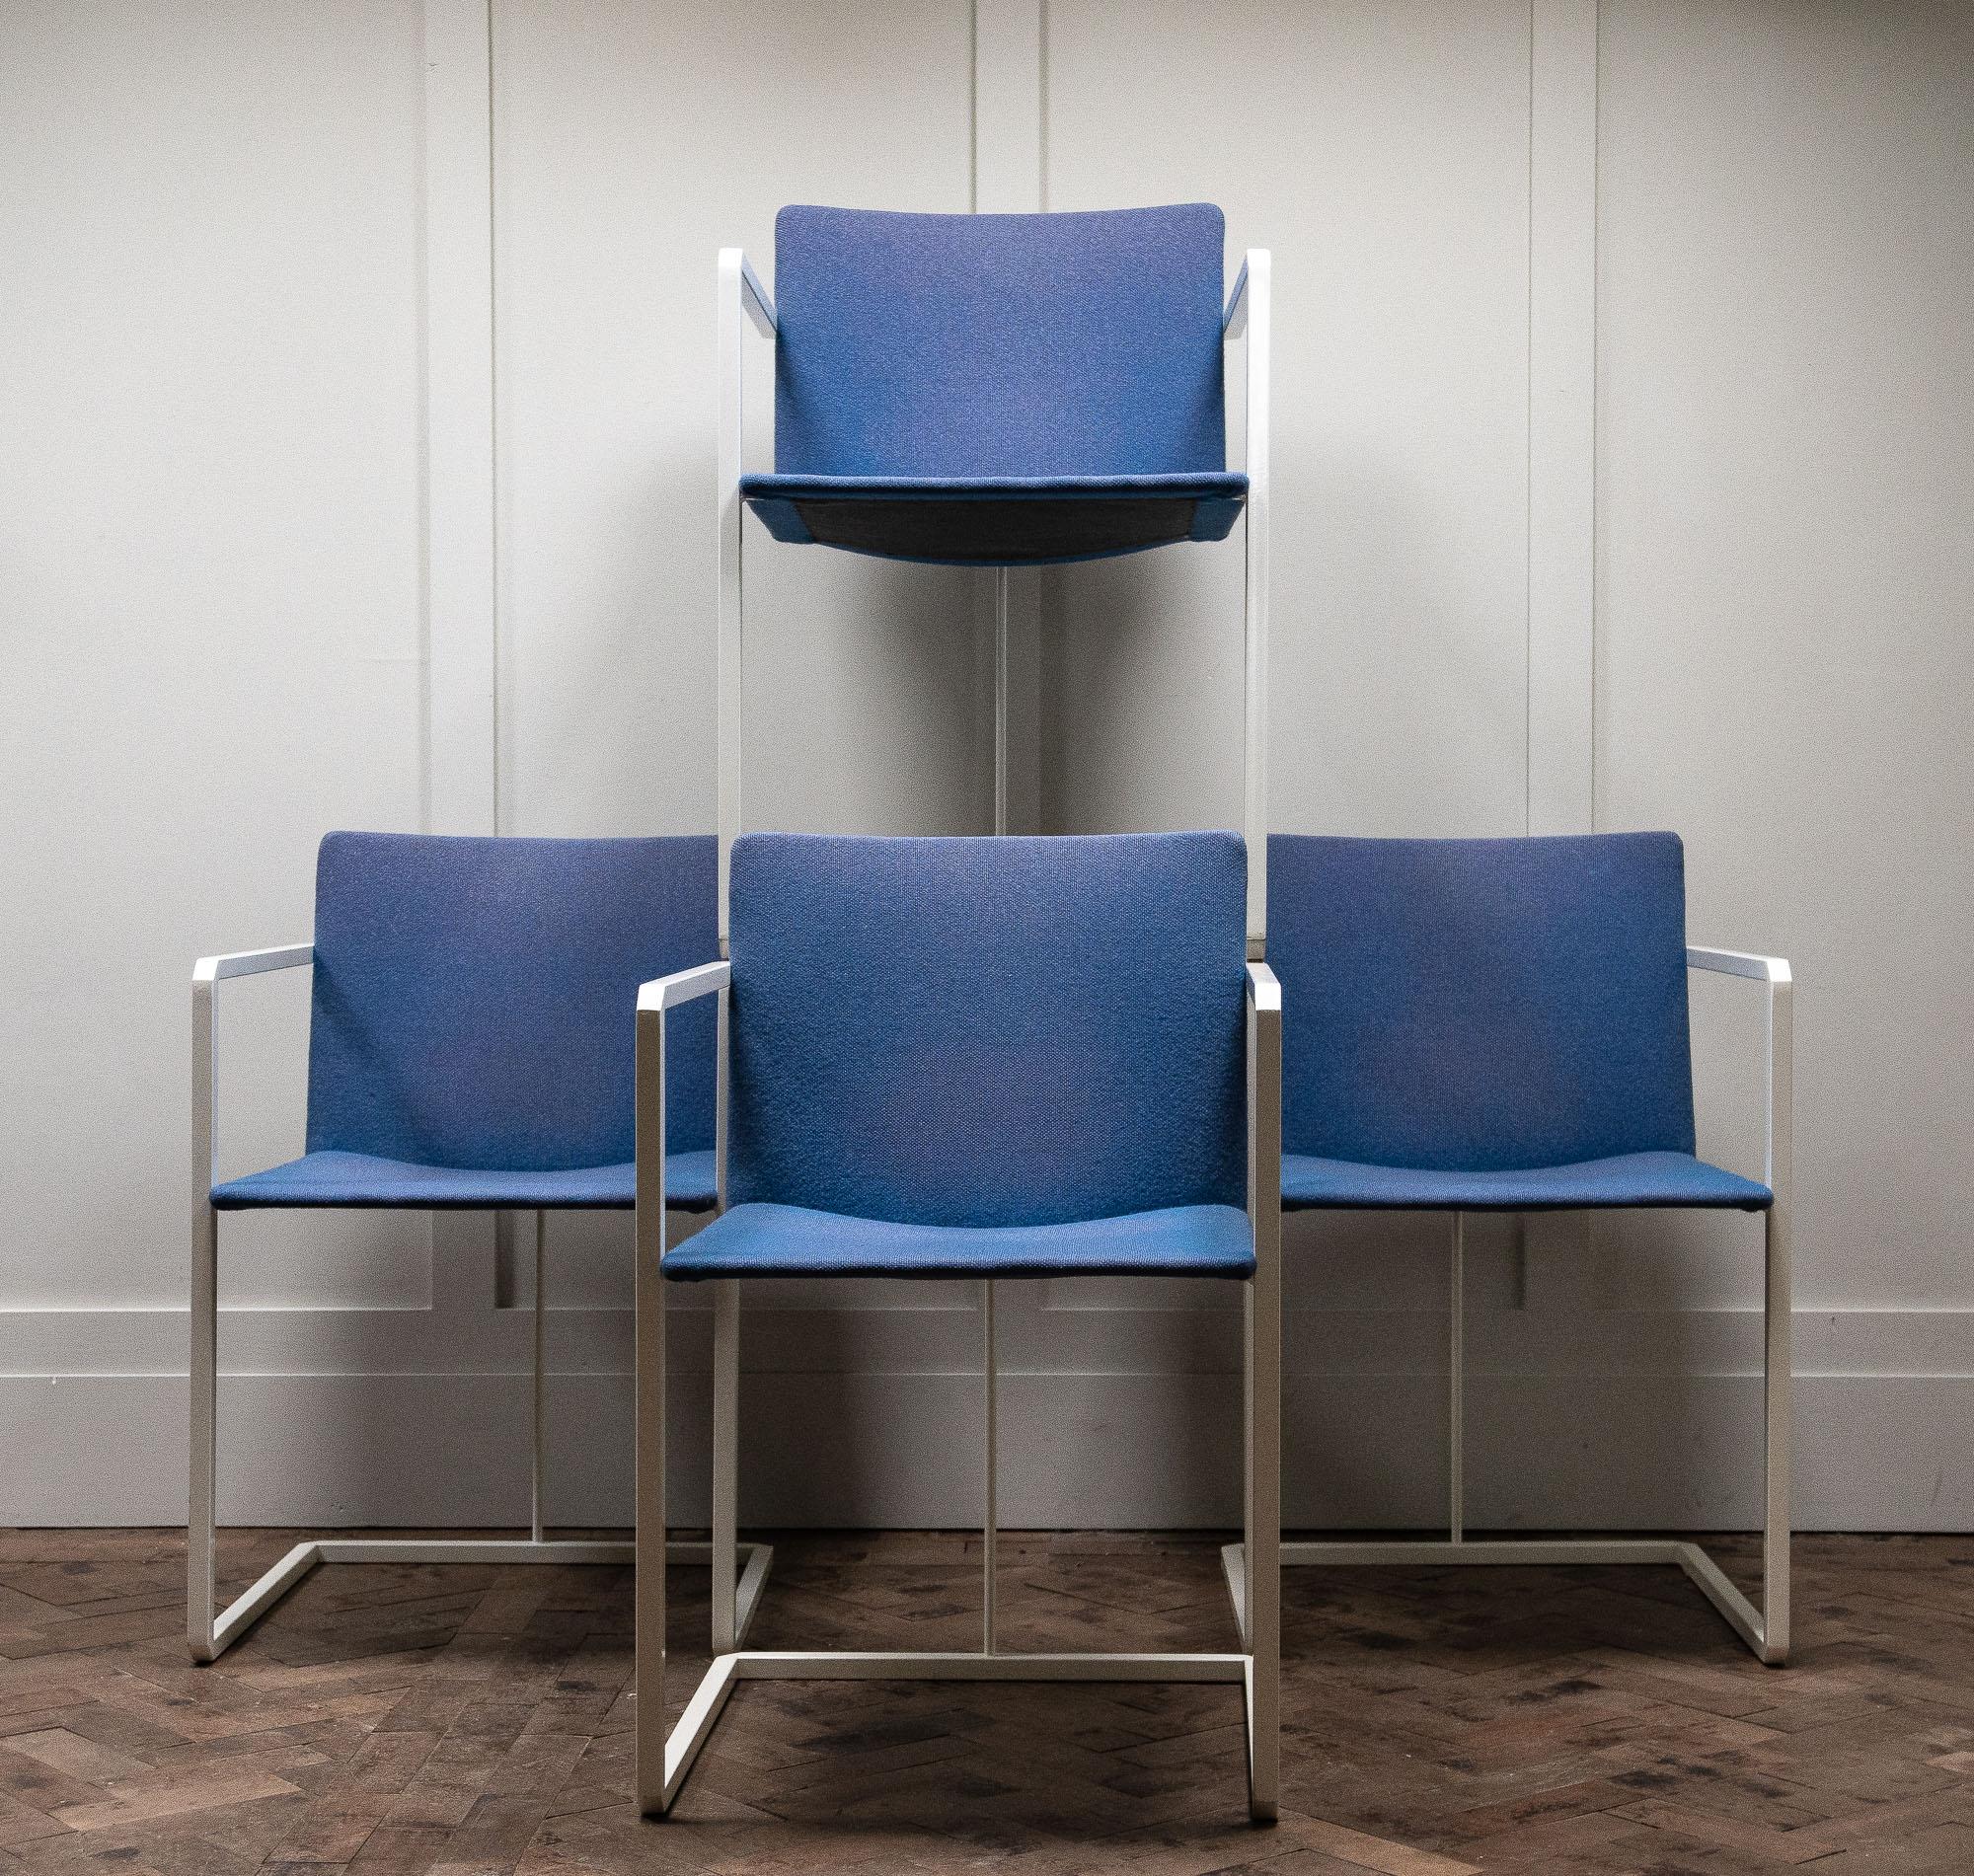 Set of four 1980s white and blue chairs, with a metal steel frame and a ply seat frame covered in blue upholstery.

Measures: Height 77cm
Seat height 44cm
Width 50cm
Depth 48cm.
 